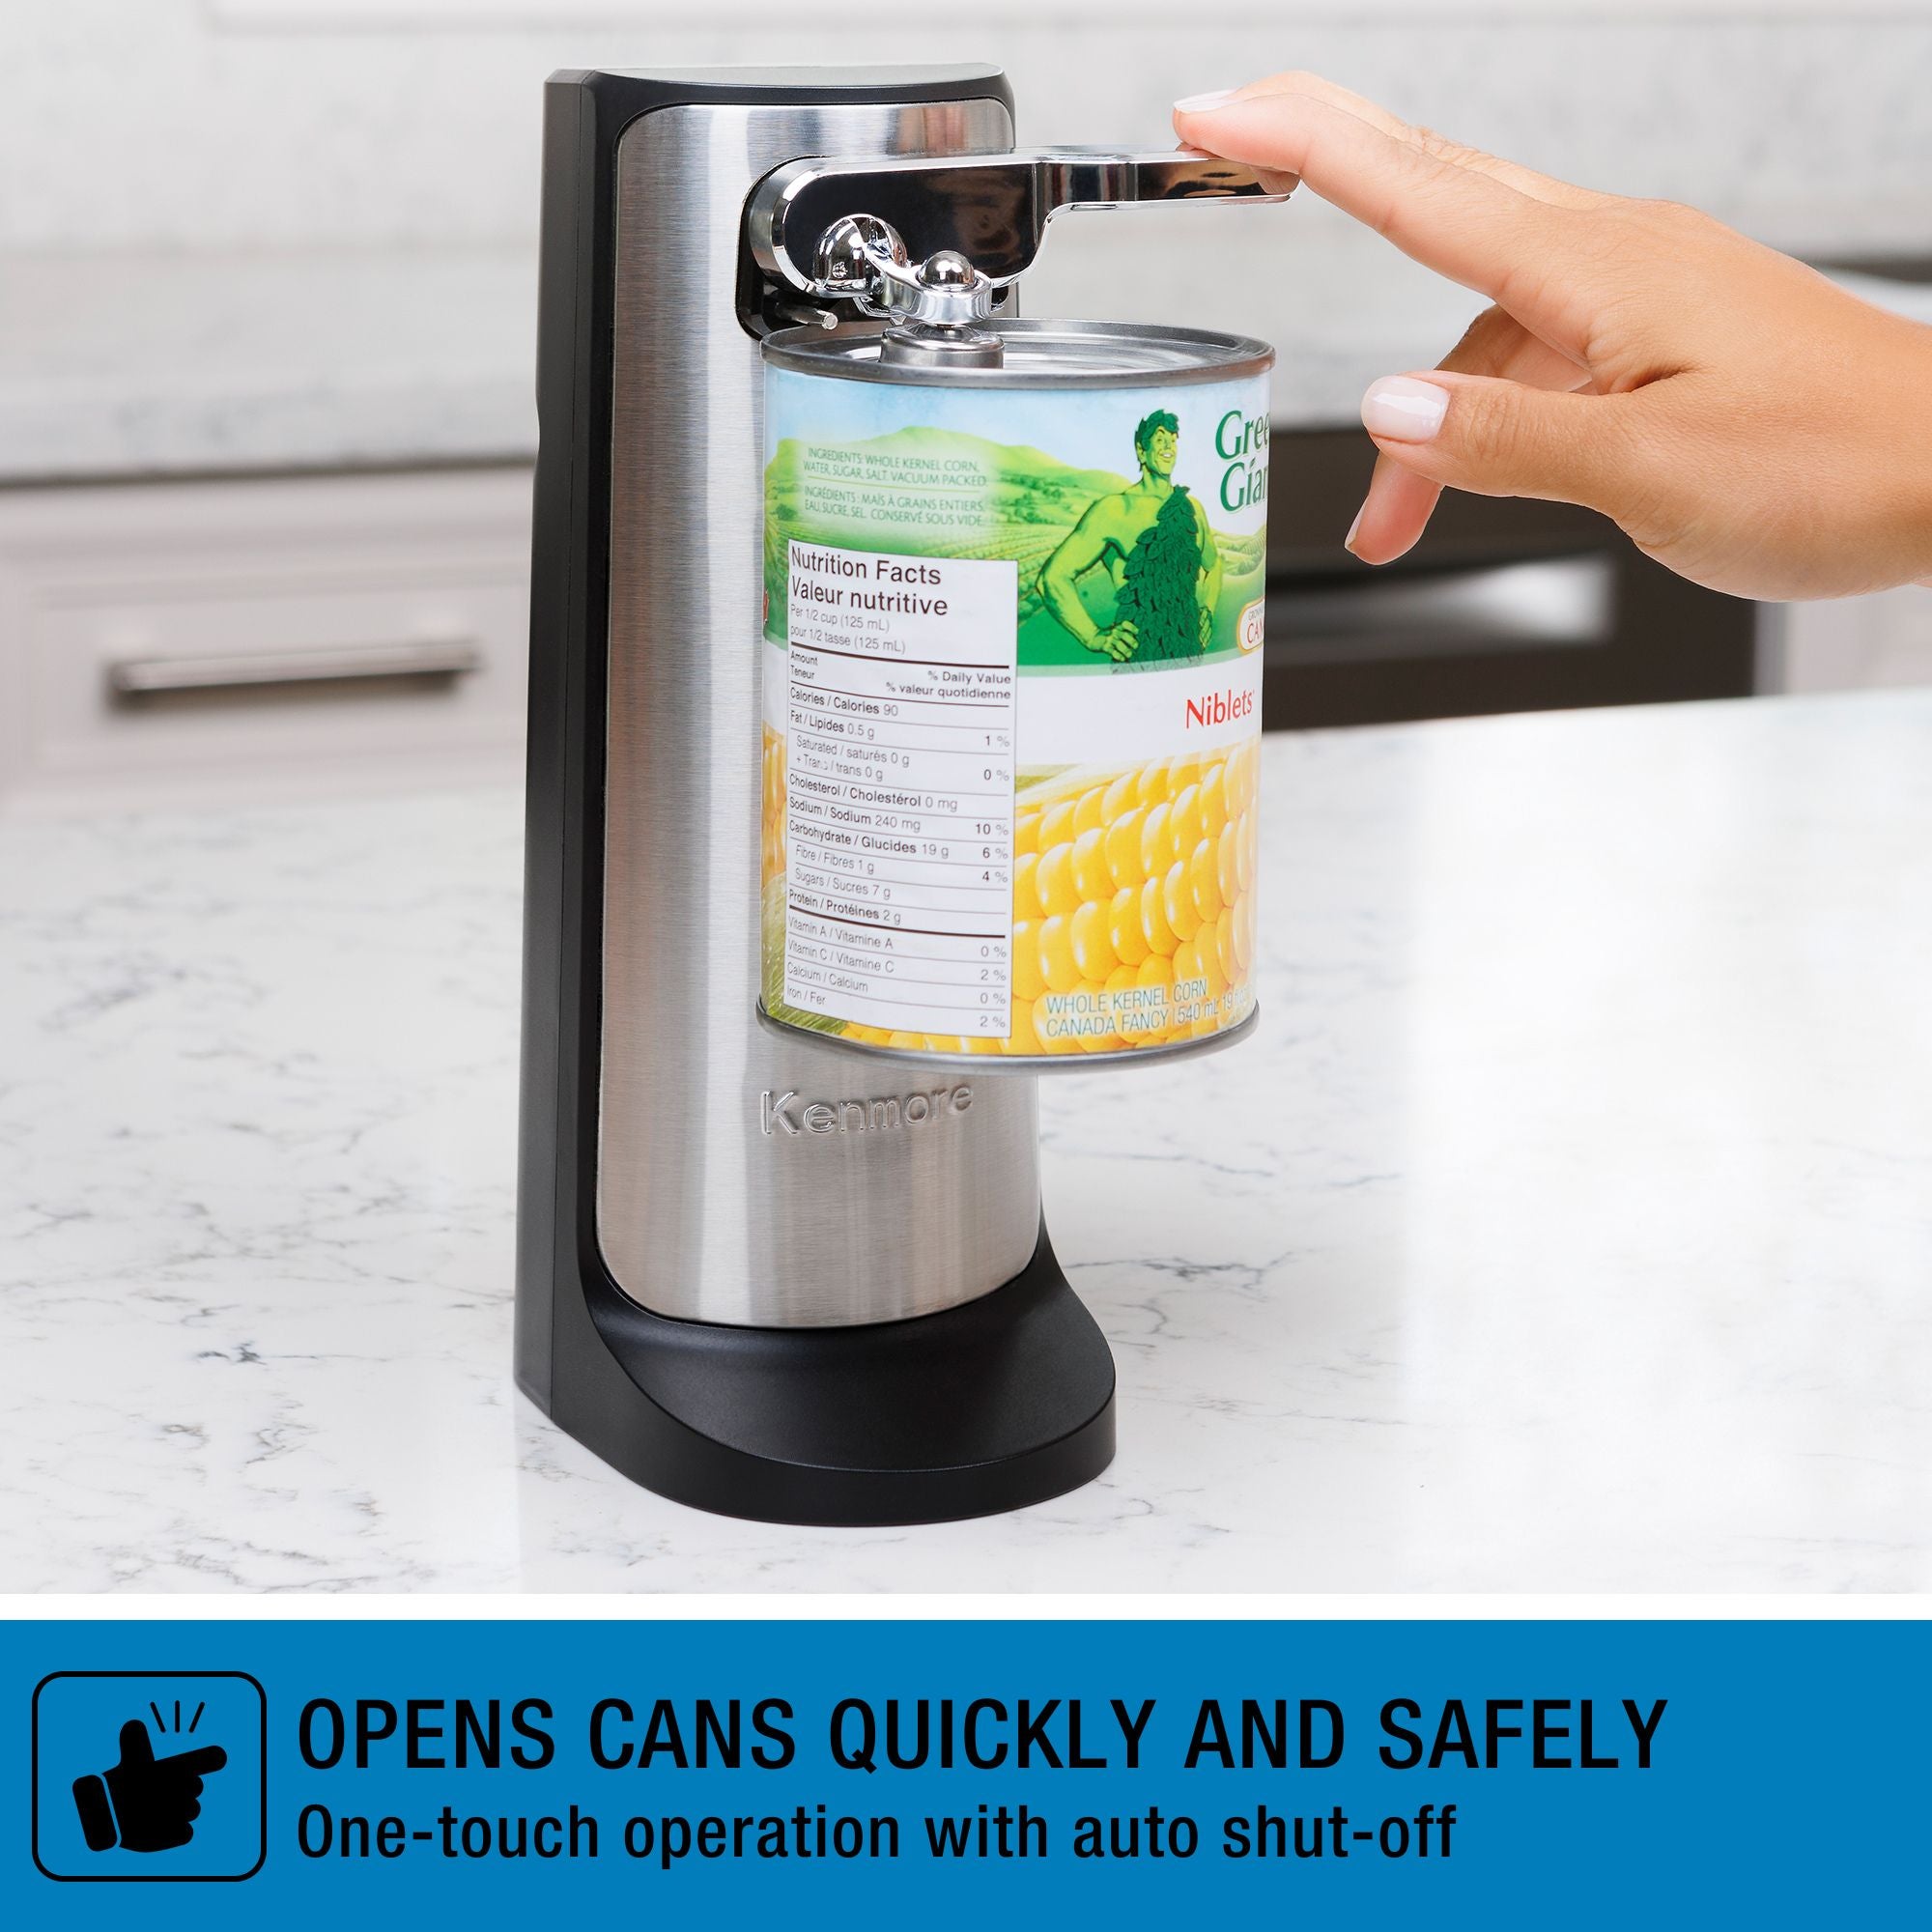 Kenmore automatic electric can opener on a white marble kitchen counter with a can of corn positioned below the cutting lever and a person's fingers touching the lever. Text below reads, "OPENS CANS QUICKLY AND SAFELY: One-touch operation with auto shut-off"